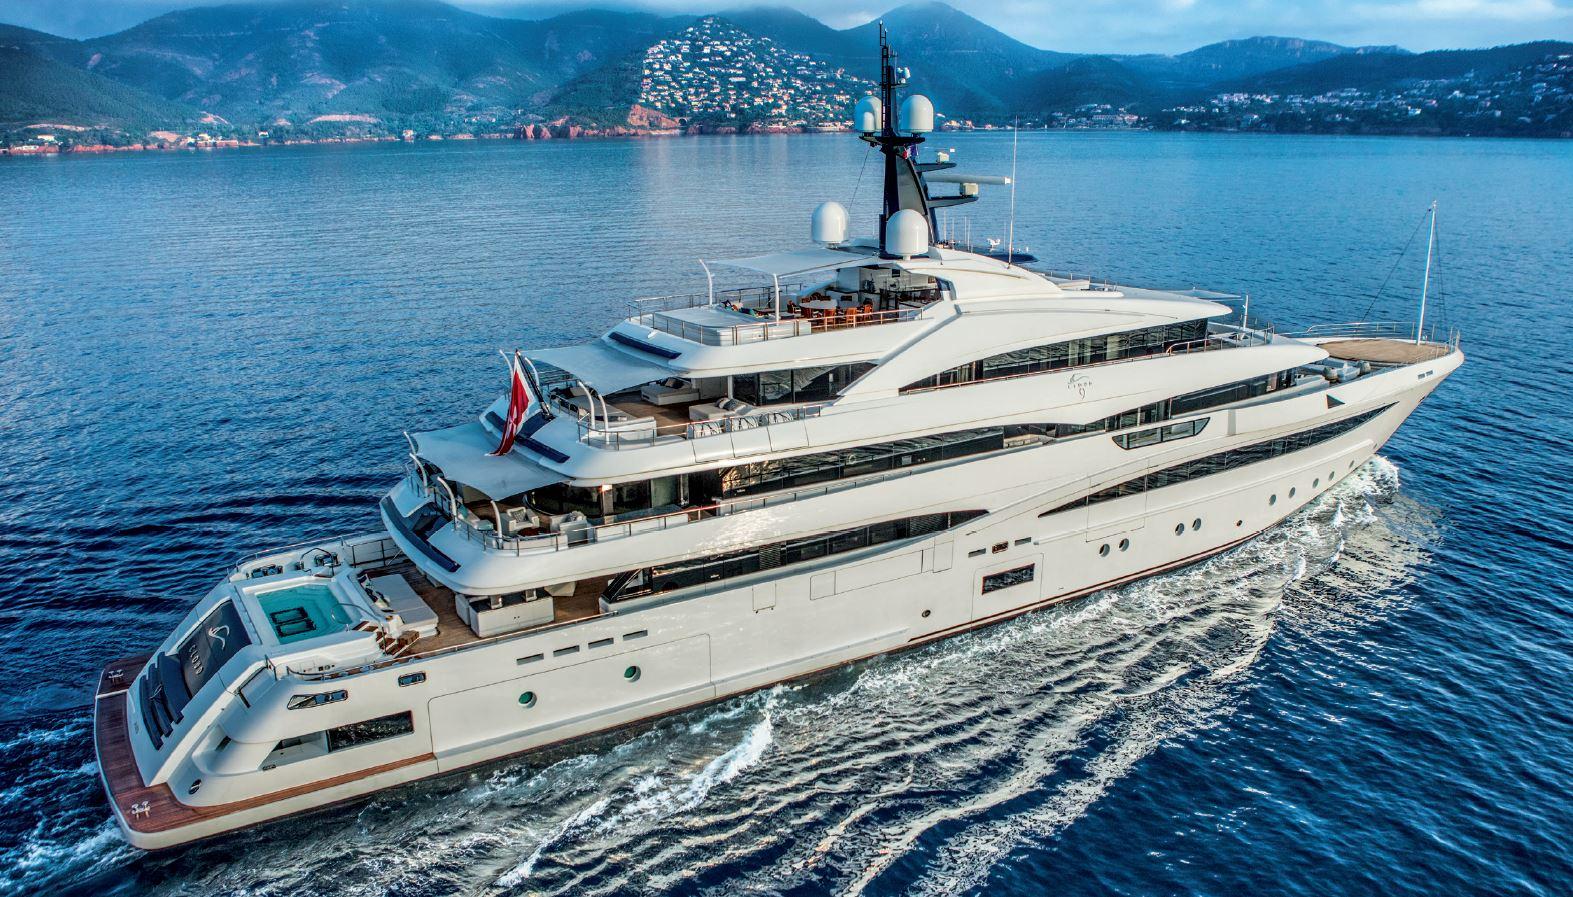 Cloud 9: CRN introduces its brand new 74 metre superyacht